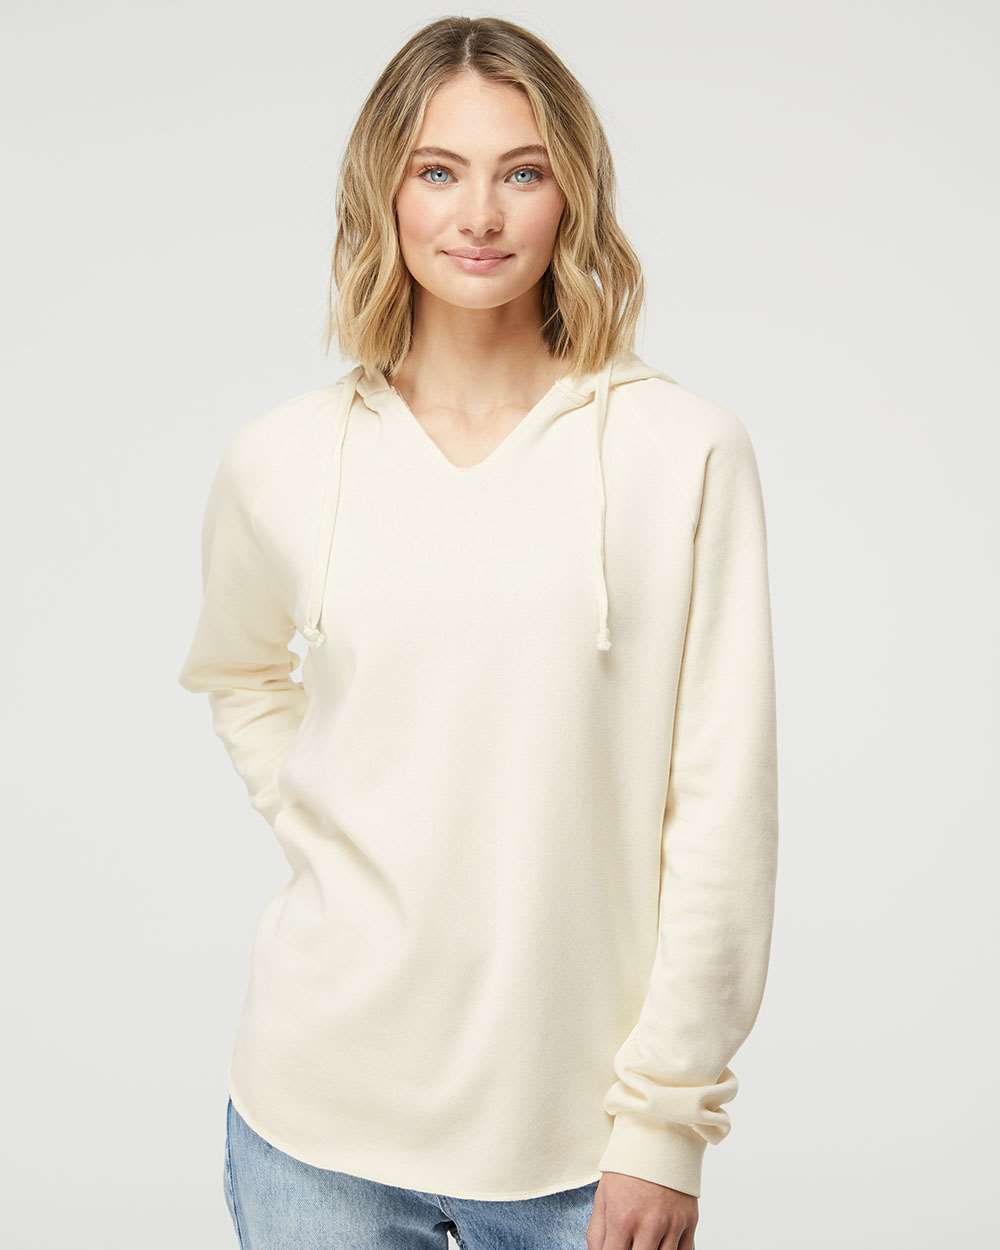 Lightweight California Wave Wash Hooded Ladies Sweatshirt - Independent Trading Co. PRM2500